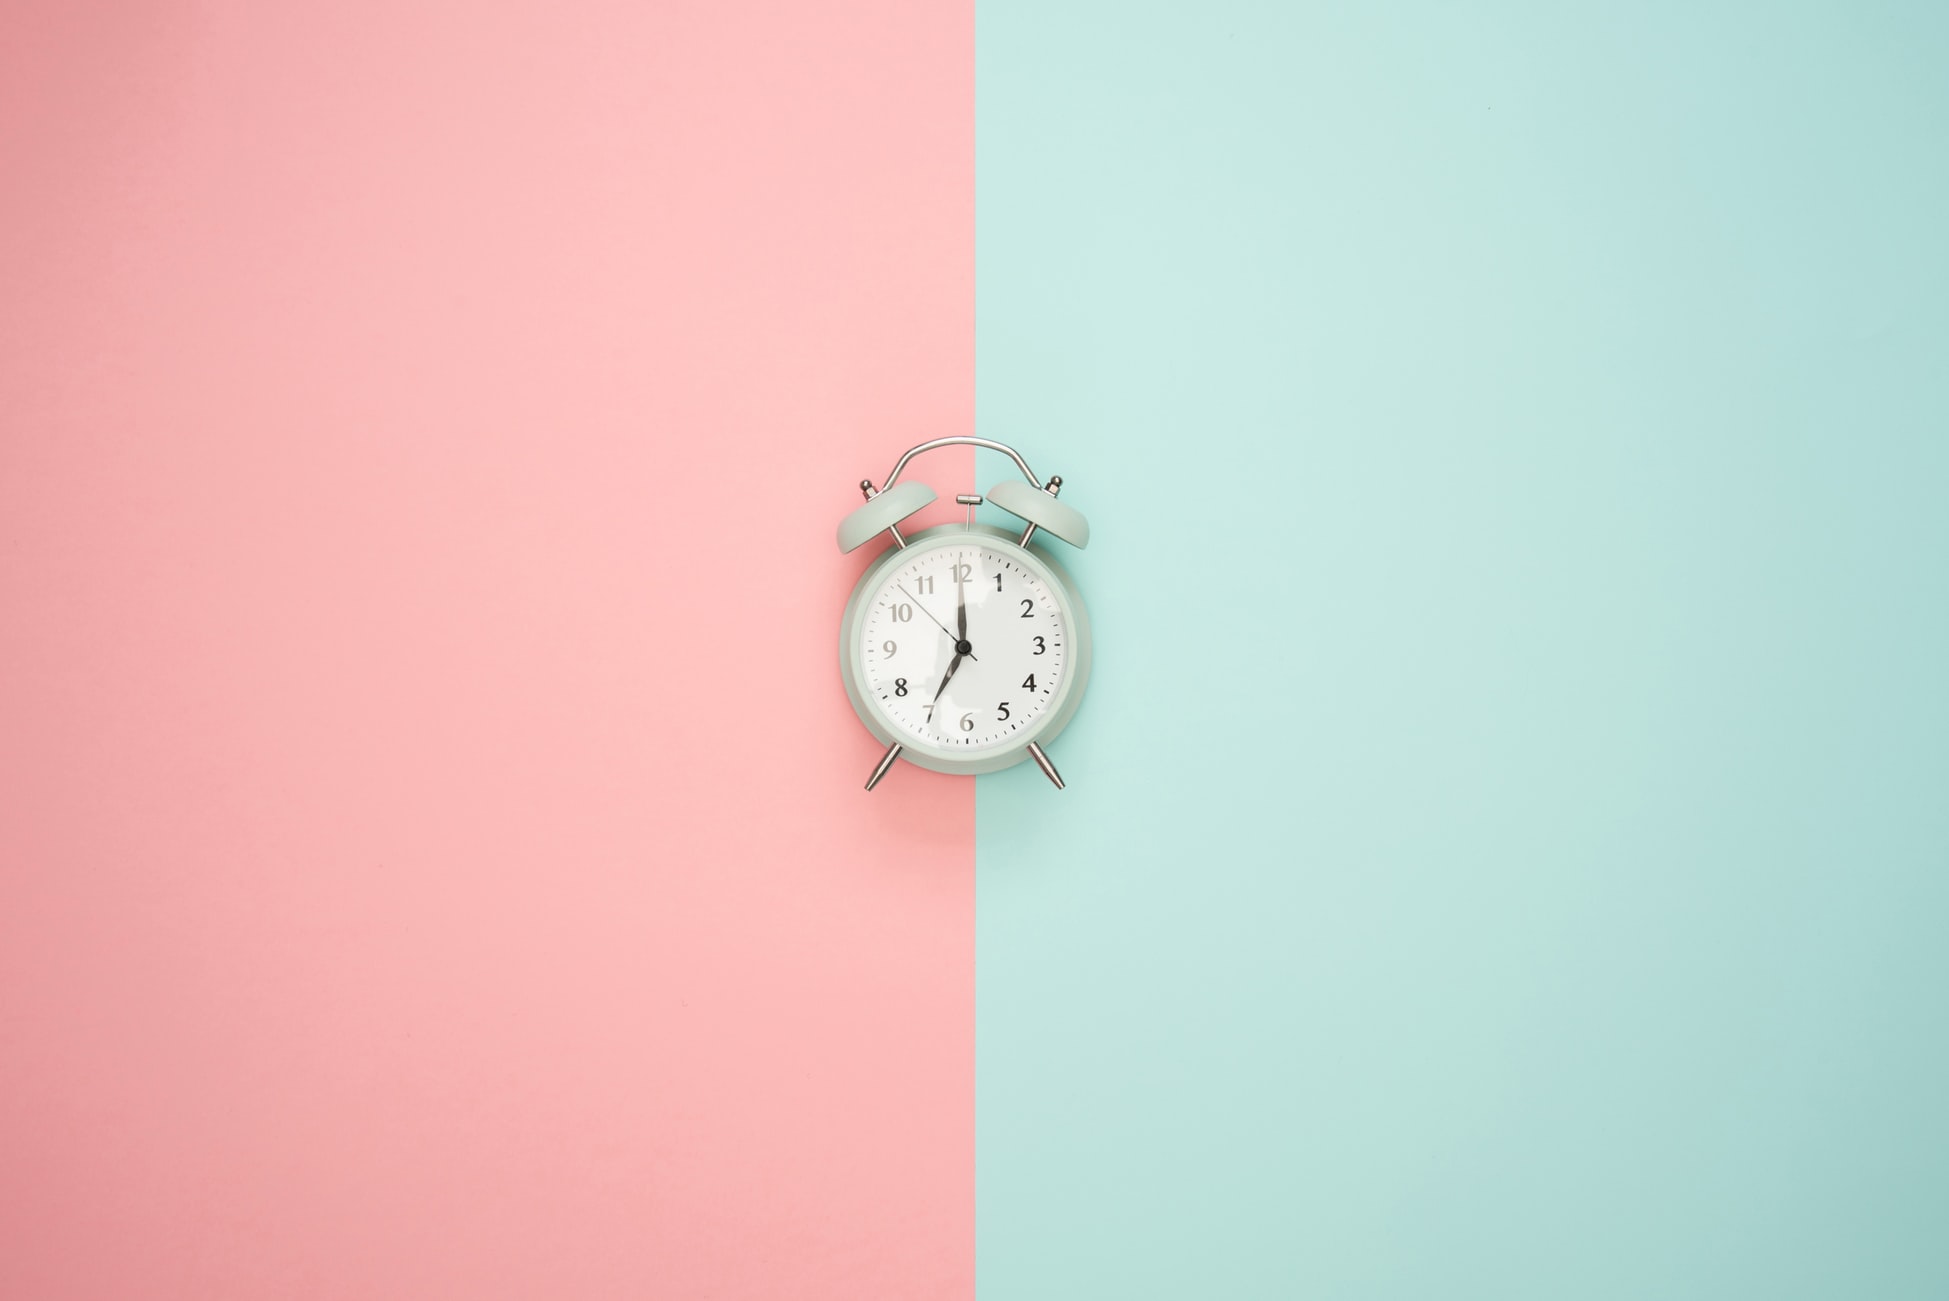 Image of an old classic alarm clock on a pink and green background